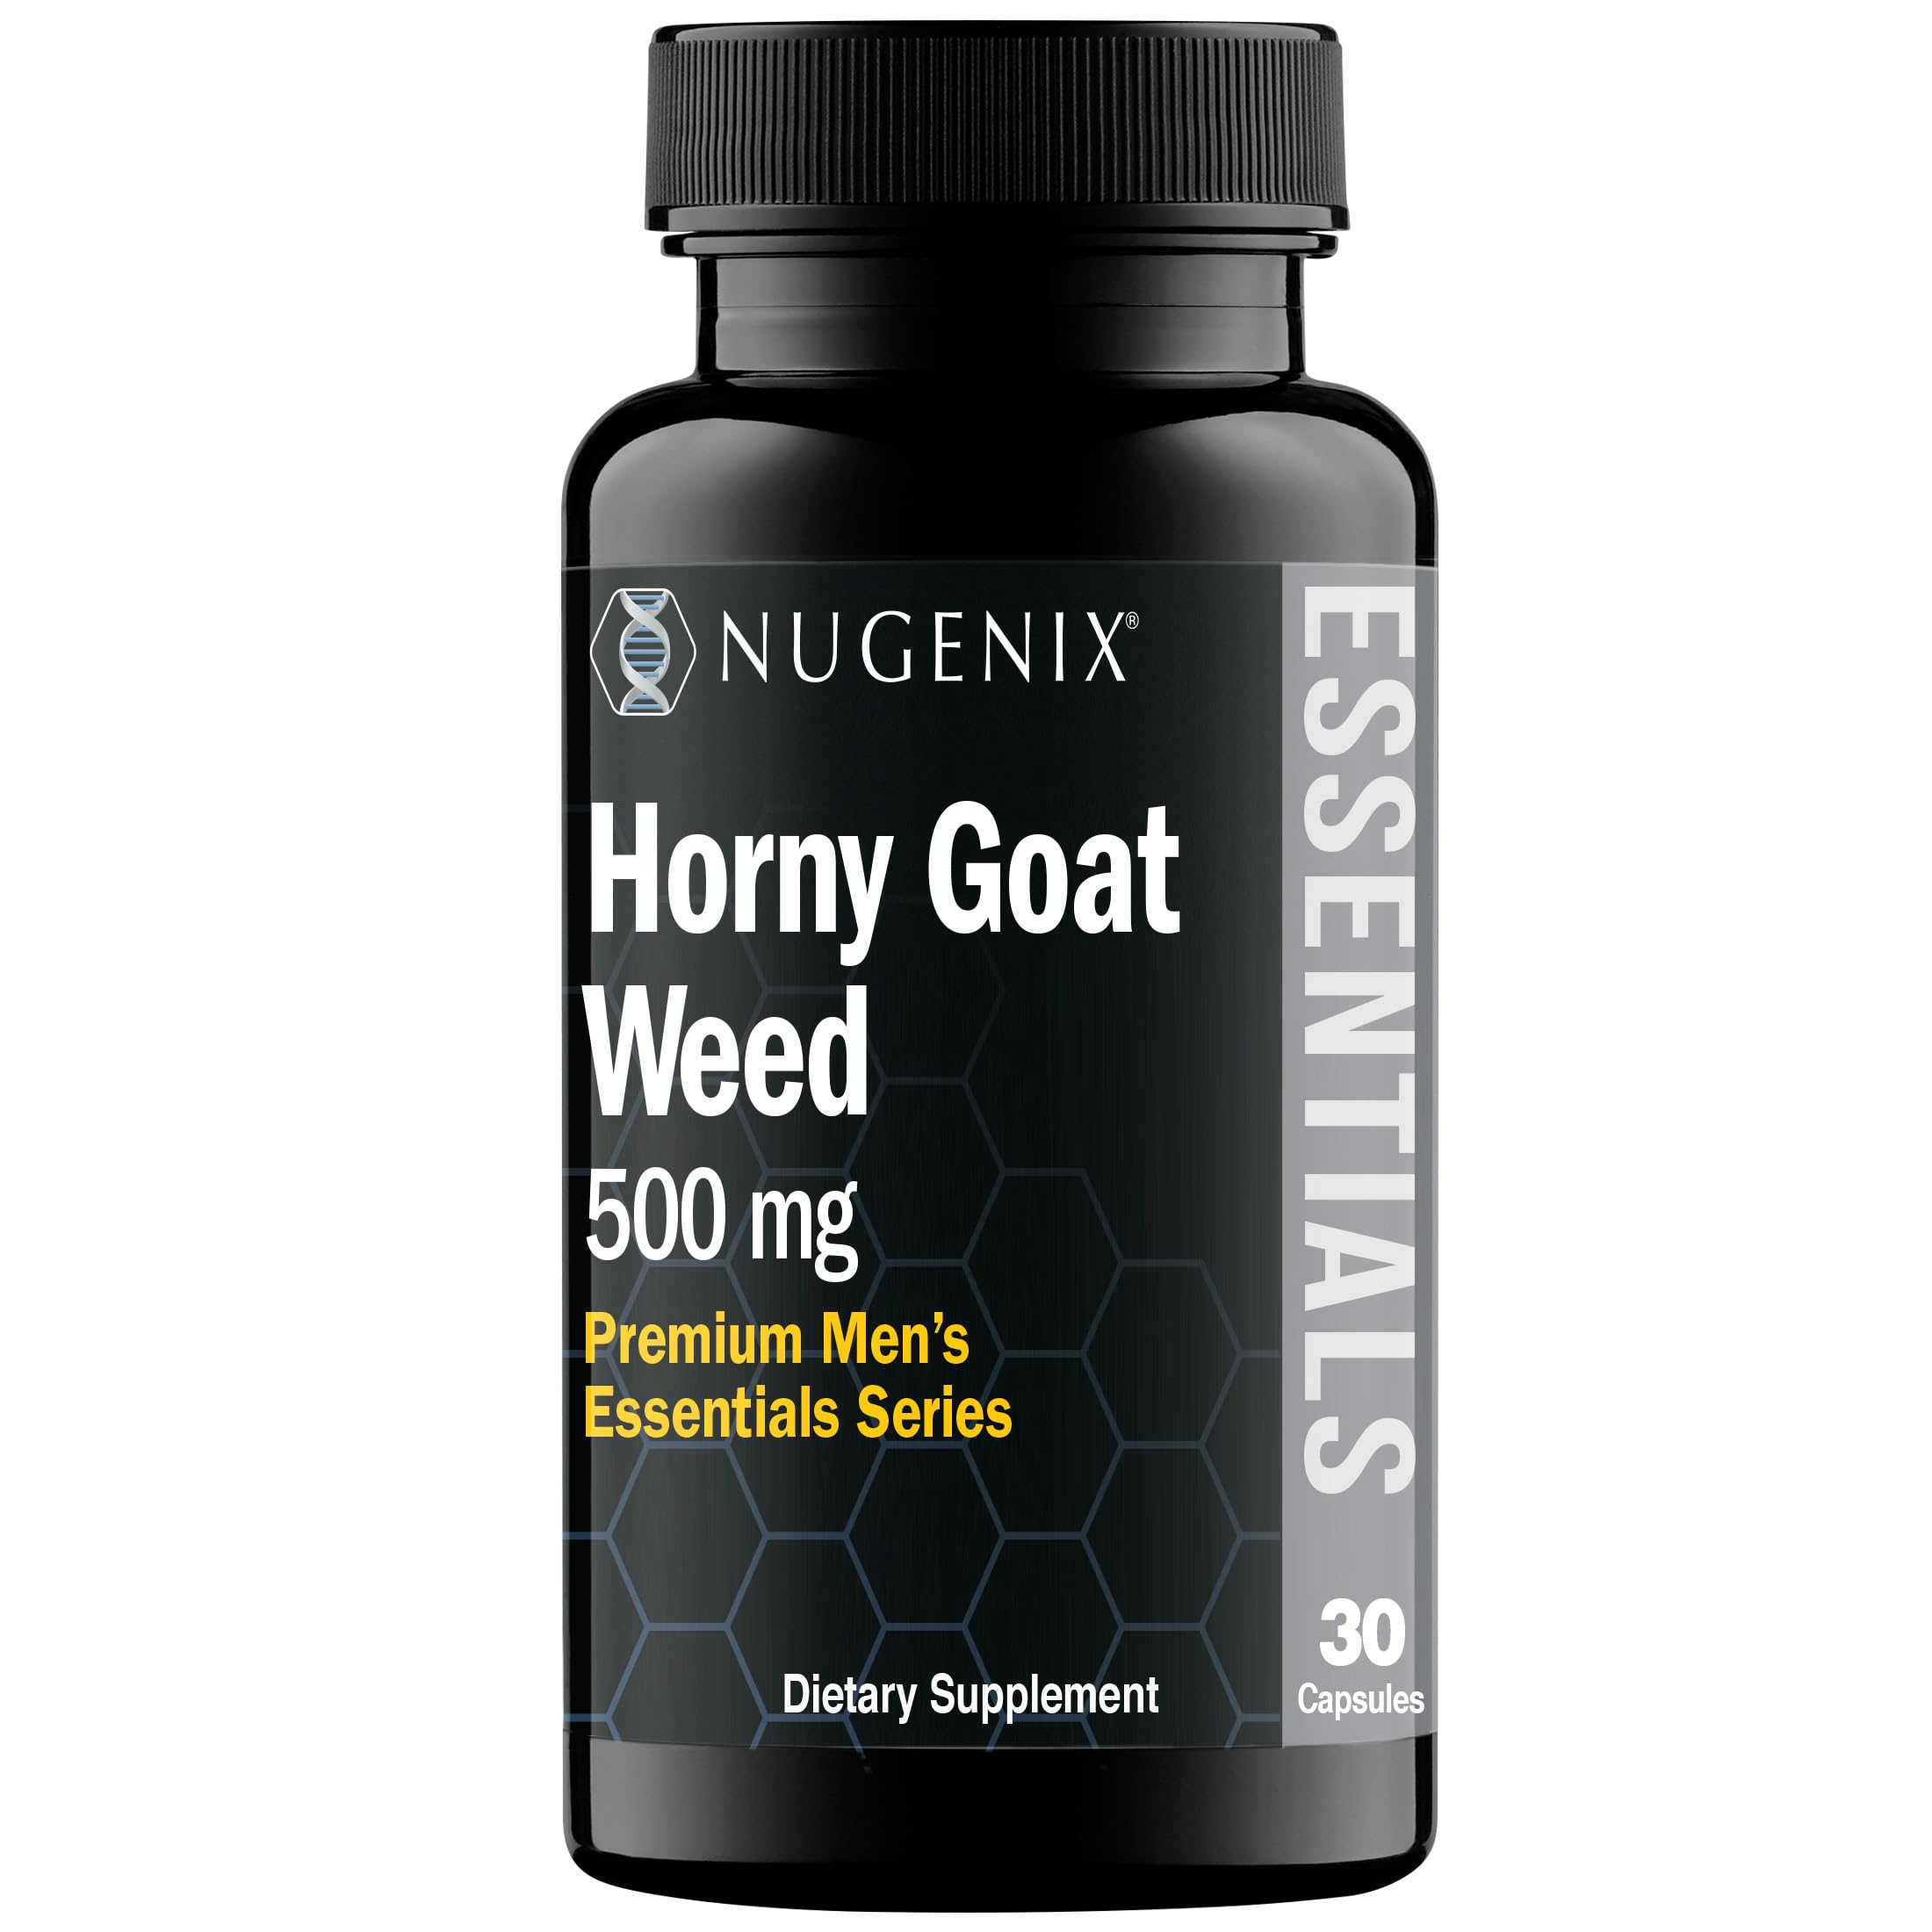 Nugenix Essentials Horny Goat Weed Catalyst Enhanced Muscle Catalyst